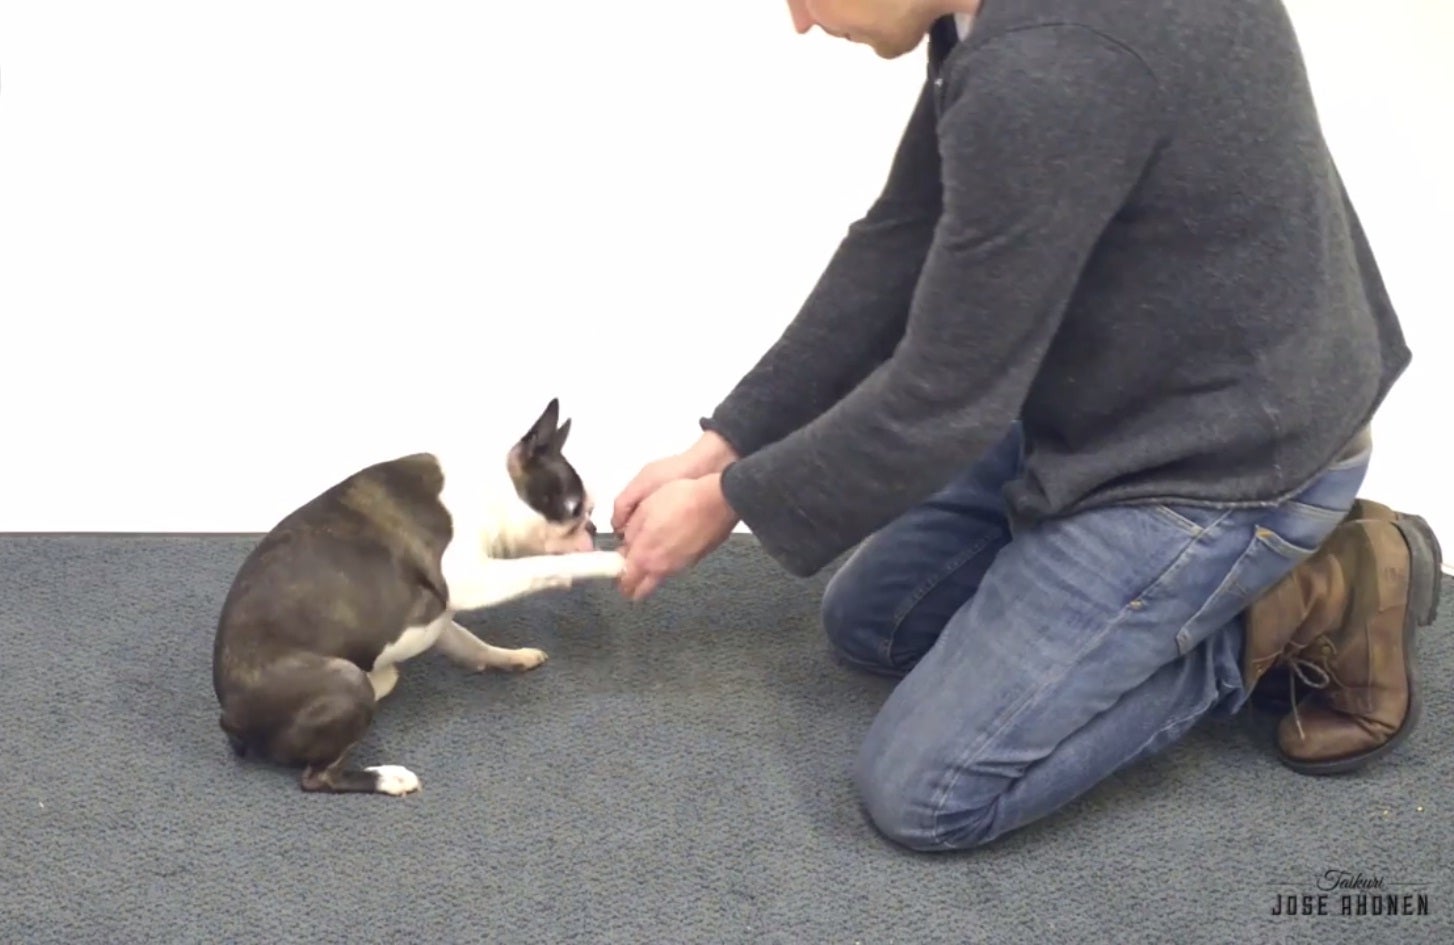 A terrier volunteers for a magic trick